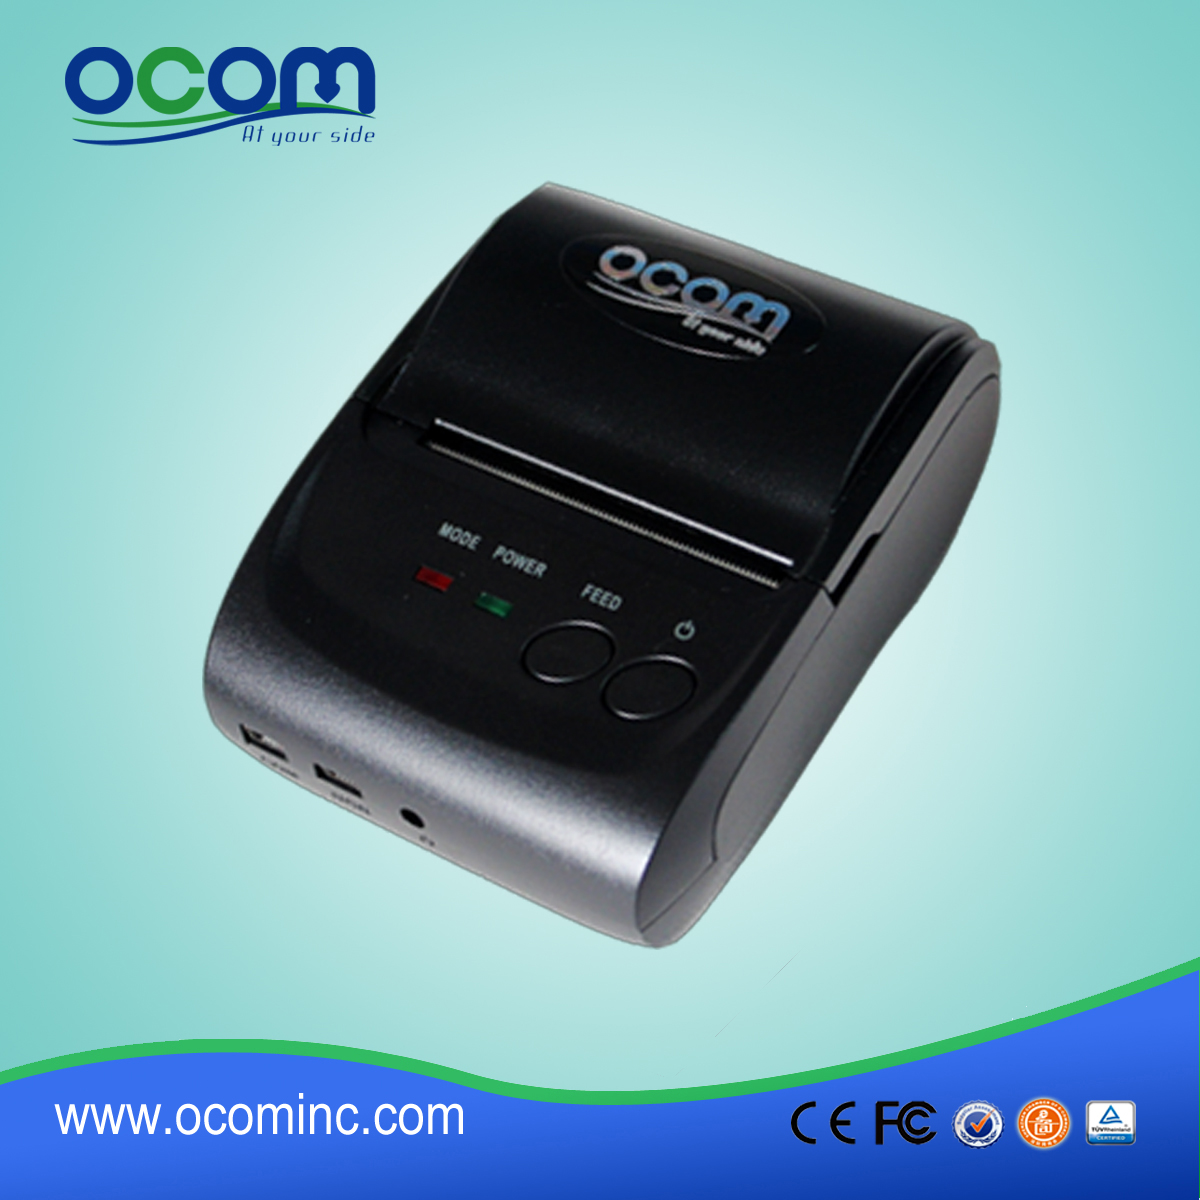 OCPP-M05: portable thermal printer price, android thermal printer pos printer